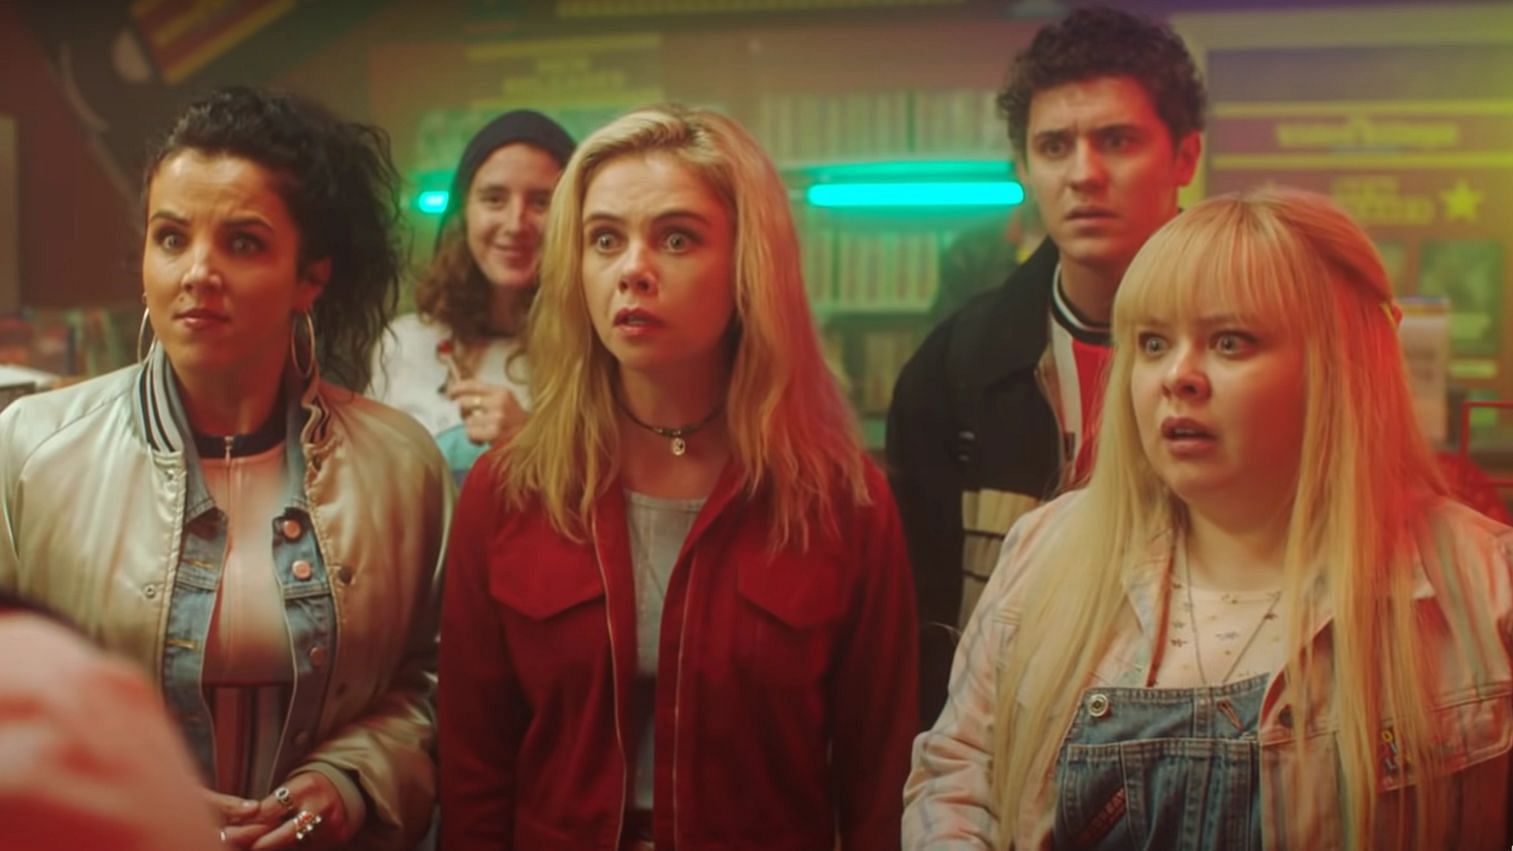 An Ode to Derry Girls A Hilarious Show About Teenage Life in Times of Strife